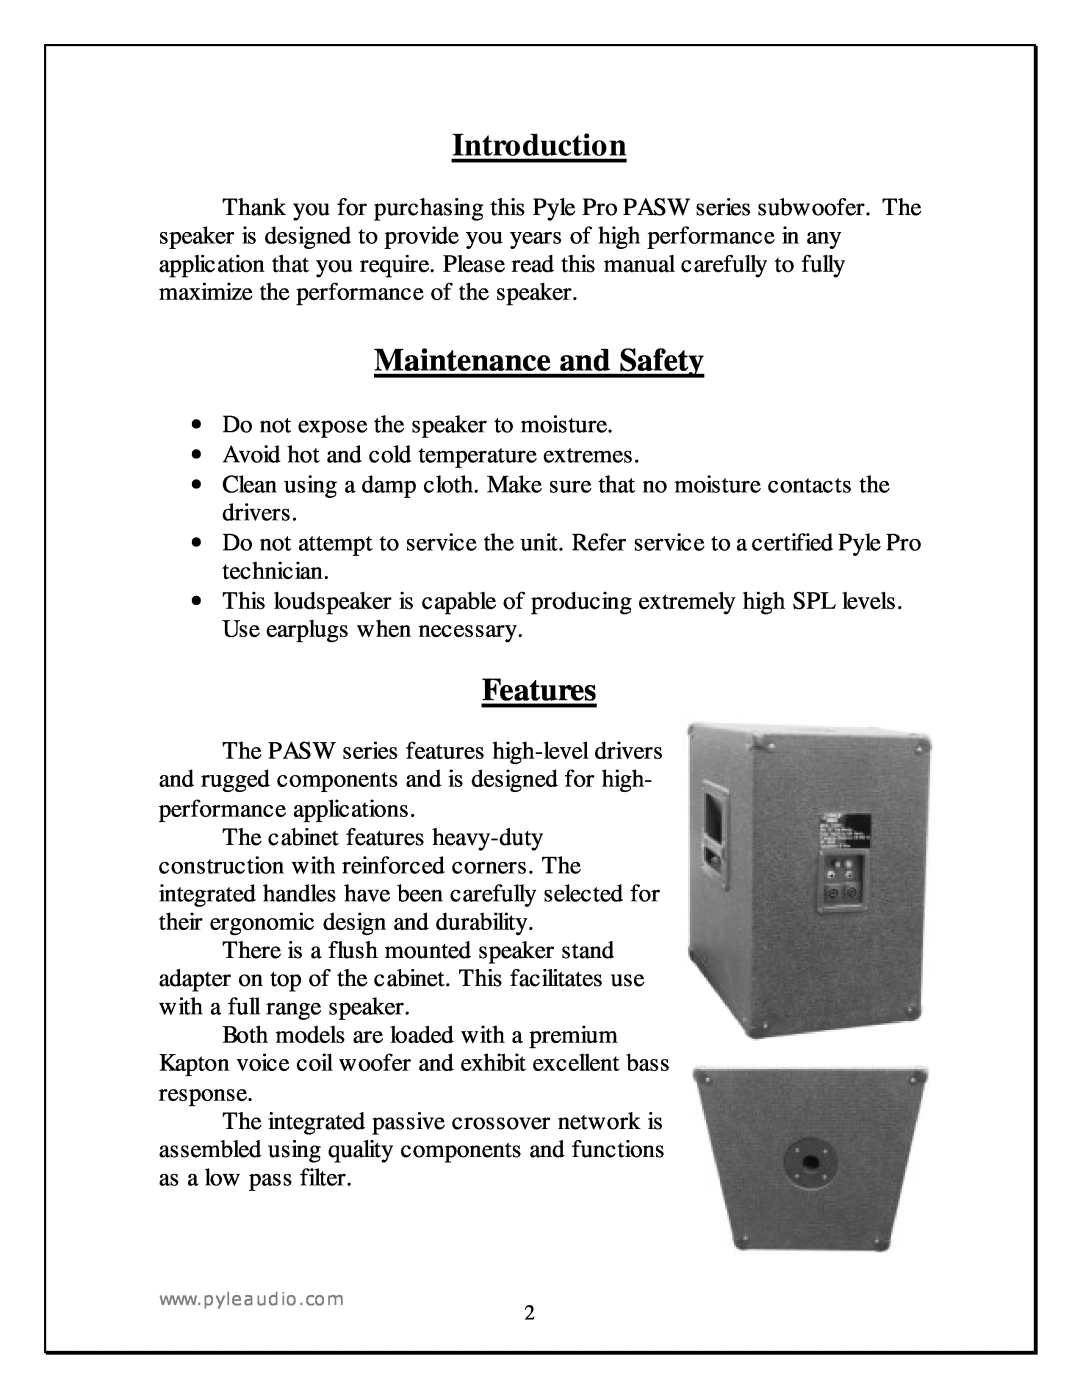 PYLE Audio PASW 18, PASW 15 manual Introduction, Maintenance and Safety, Features 